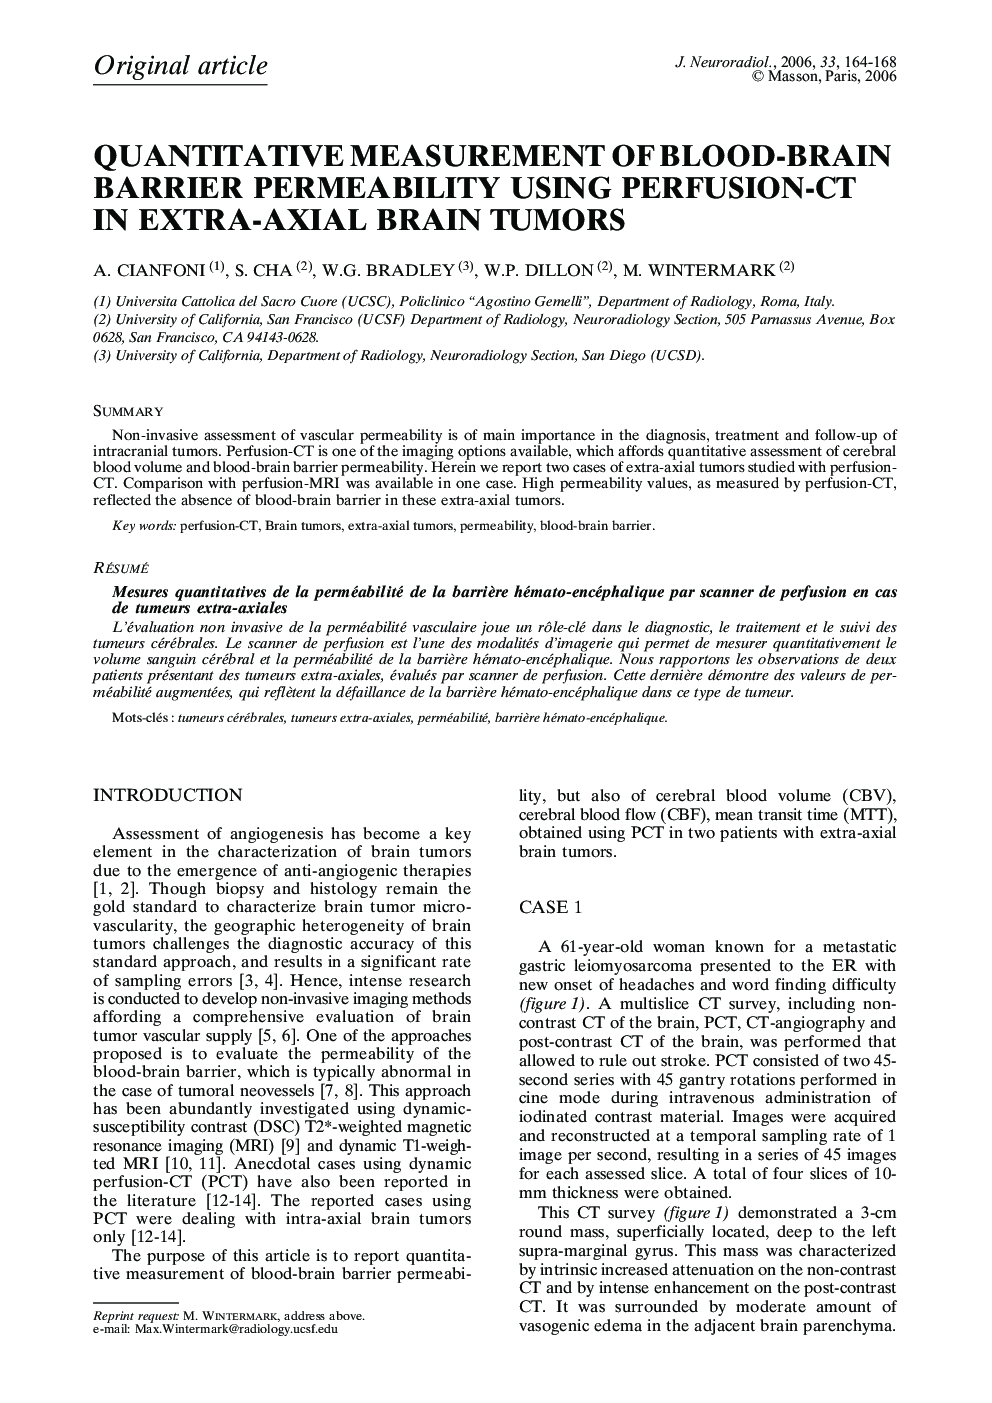 Quantitative measurement of blood-brain barrier permeability using perfusion-CT in extra-axial brain tumors